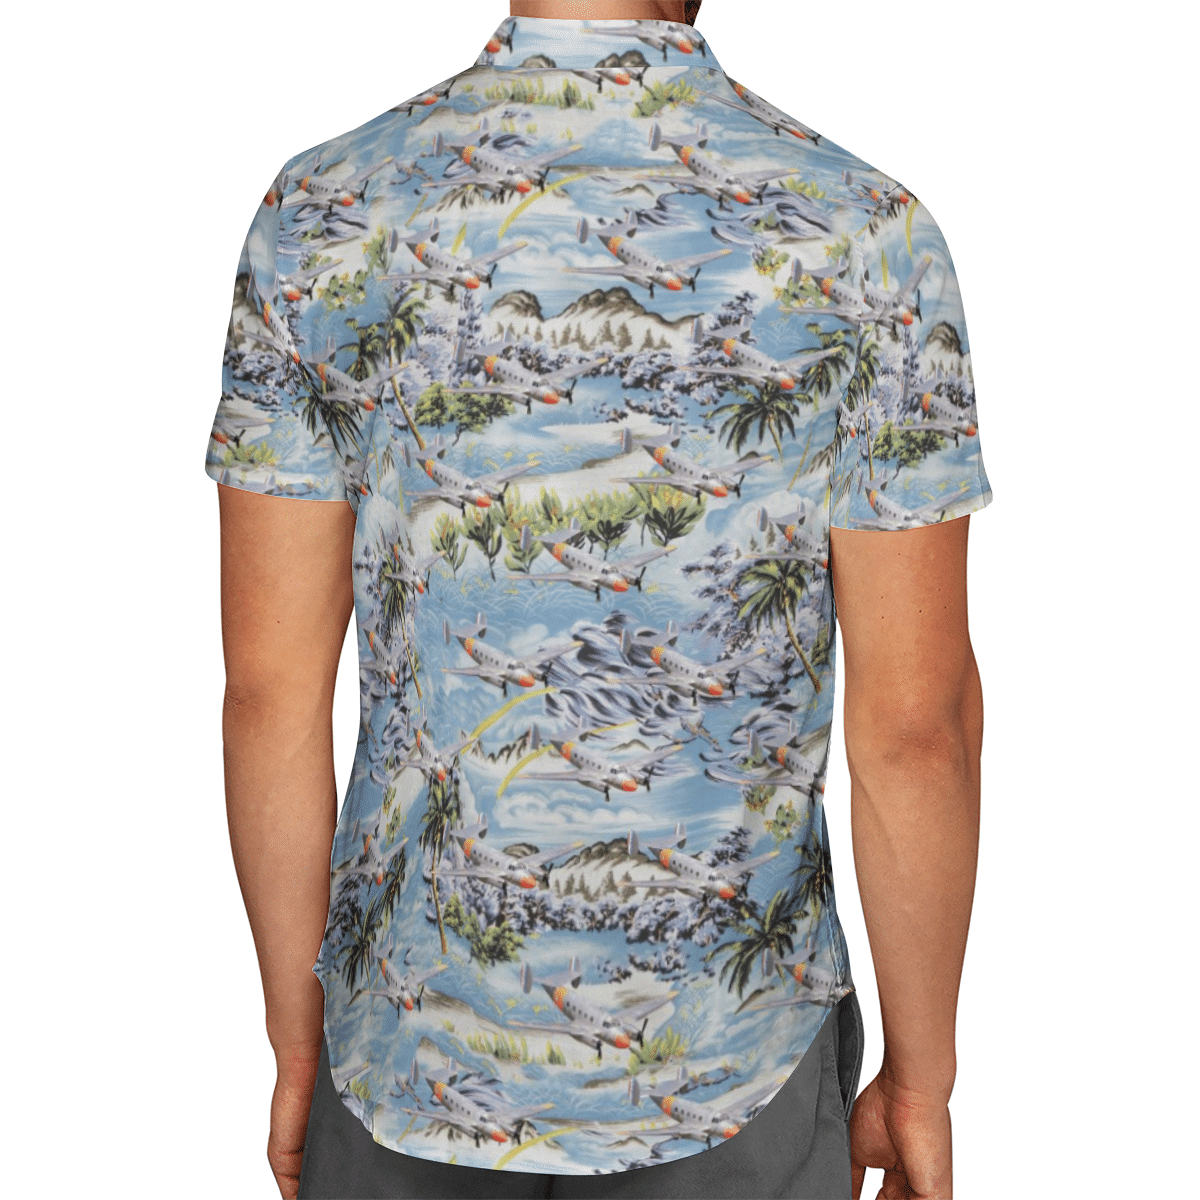 Going to the beach with a quality shirt 169